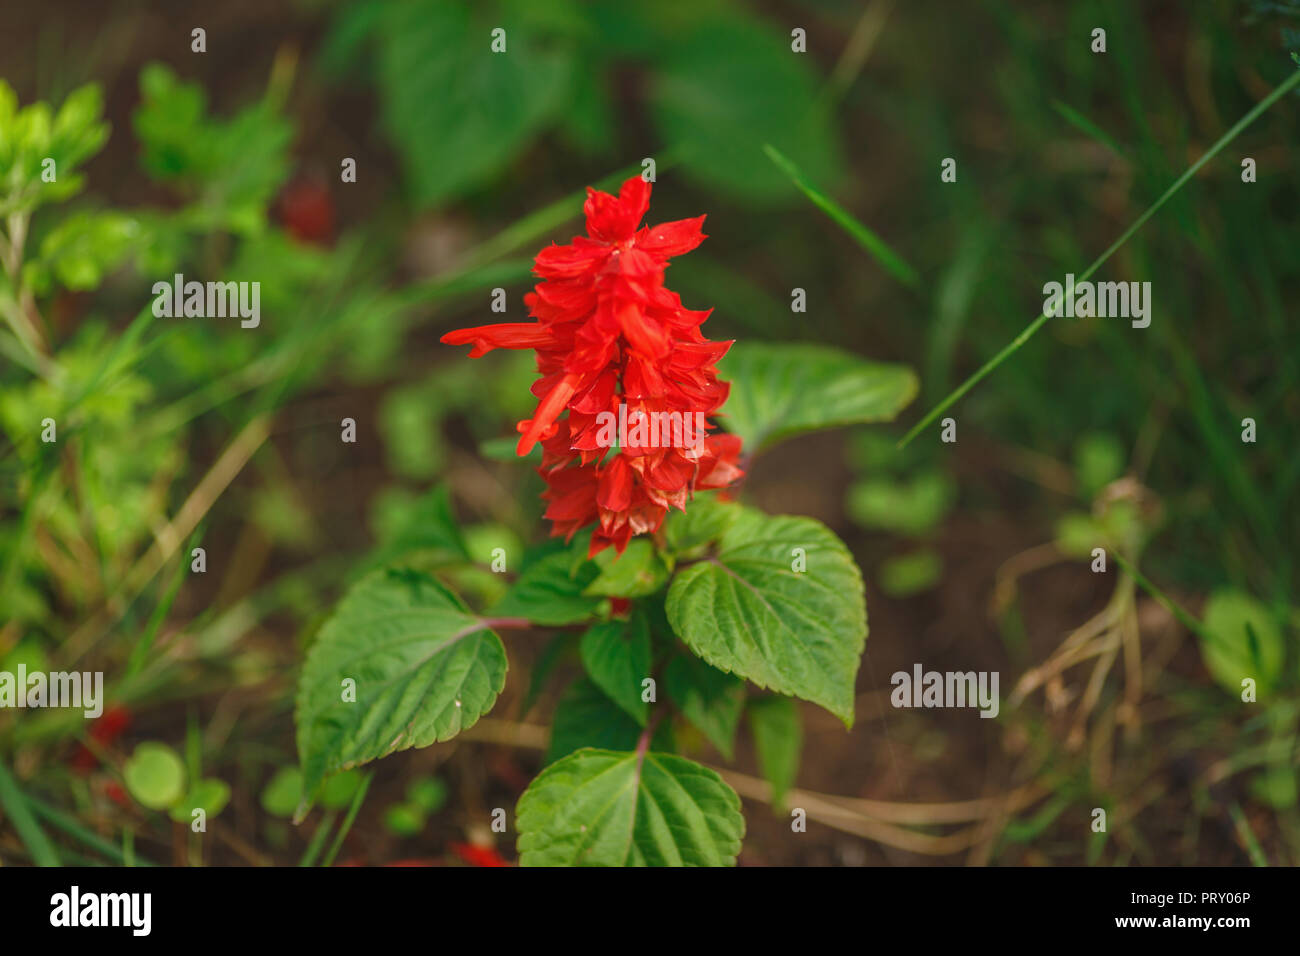 beautiful blossoming red flower Salvia splendens grows in the garden Stock Photo